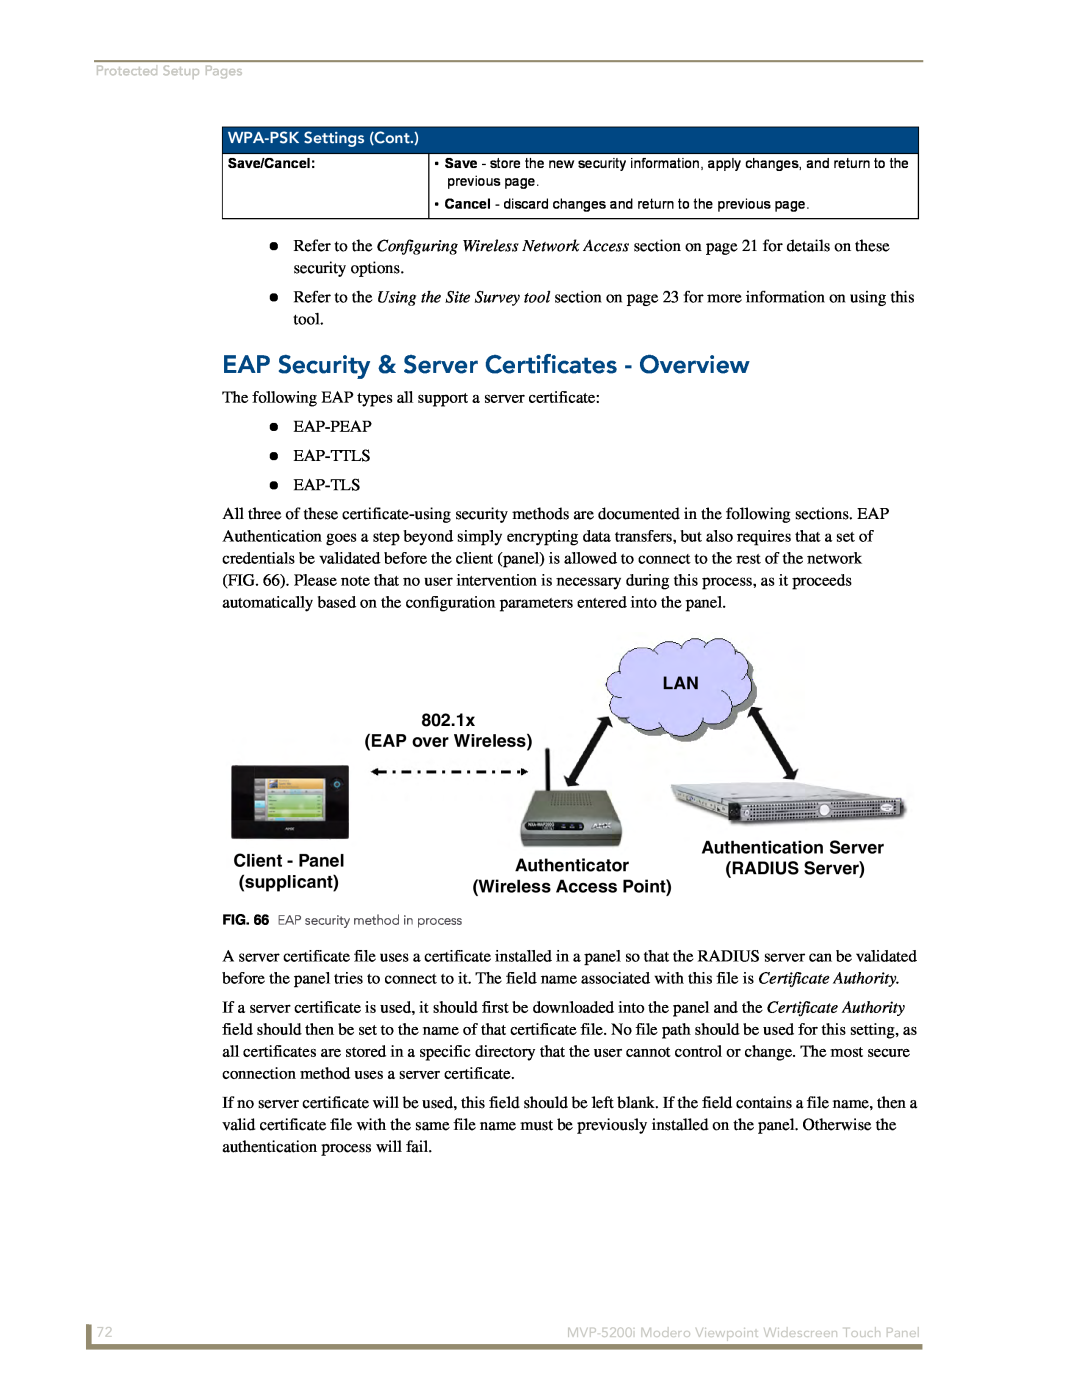 AMX MVP-5200i manual EAP Security & Server Certificates - Overview, LAN 802.1x EAP over Wireless, Authentication Server 